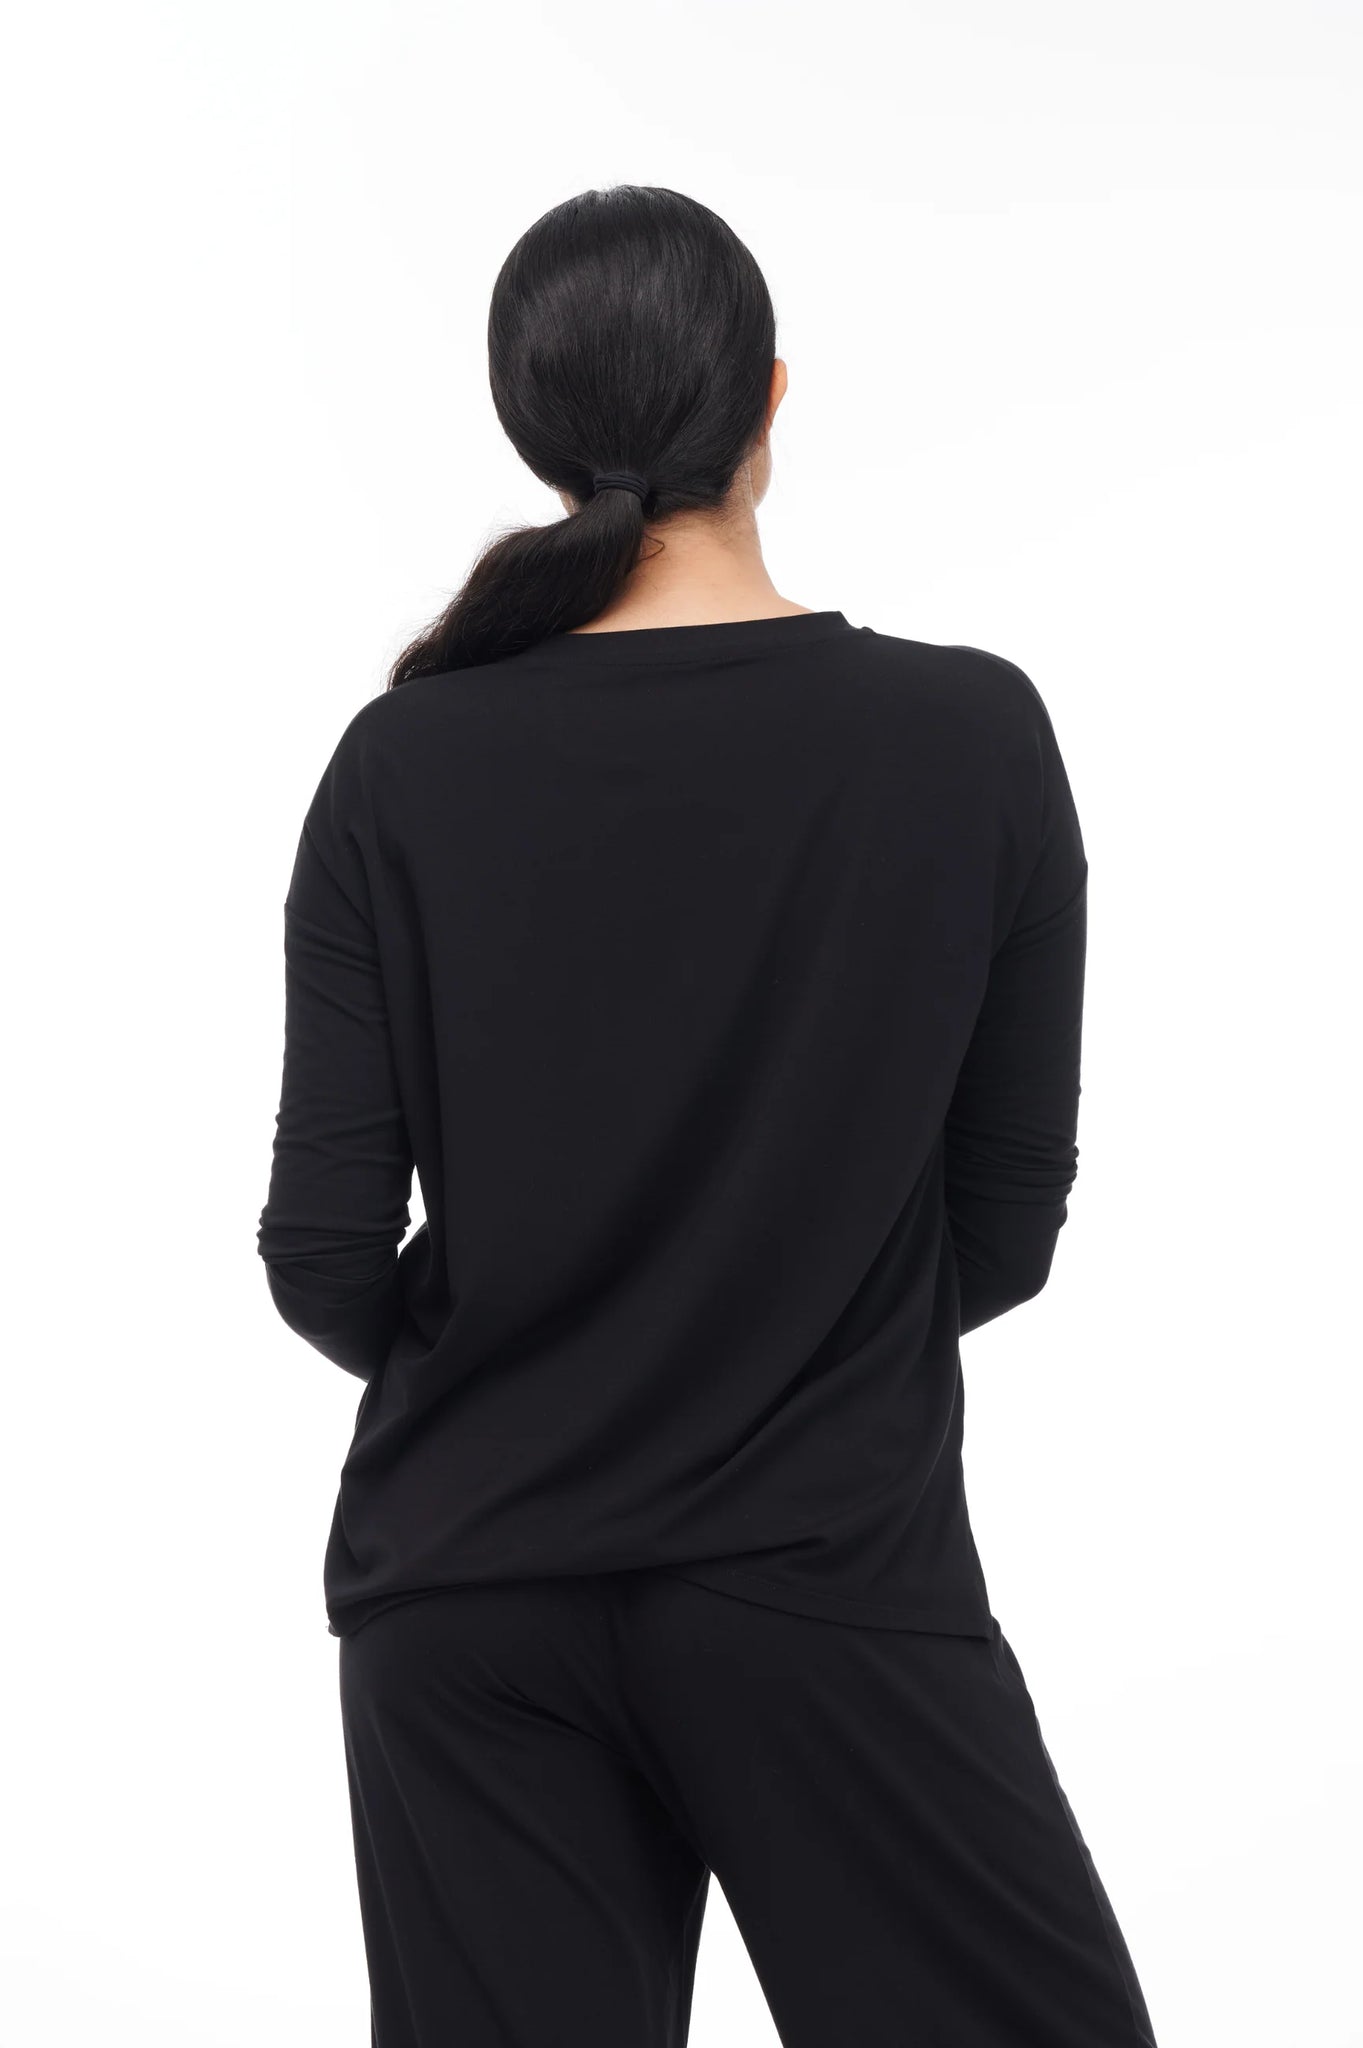 Photo of model wearing Everette Lounge Set in the colour black from paper label available at UniKoncept in Waterloo black coloured long sleeve top and pants back view photo of top